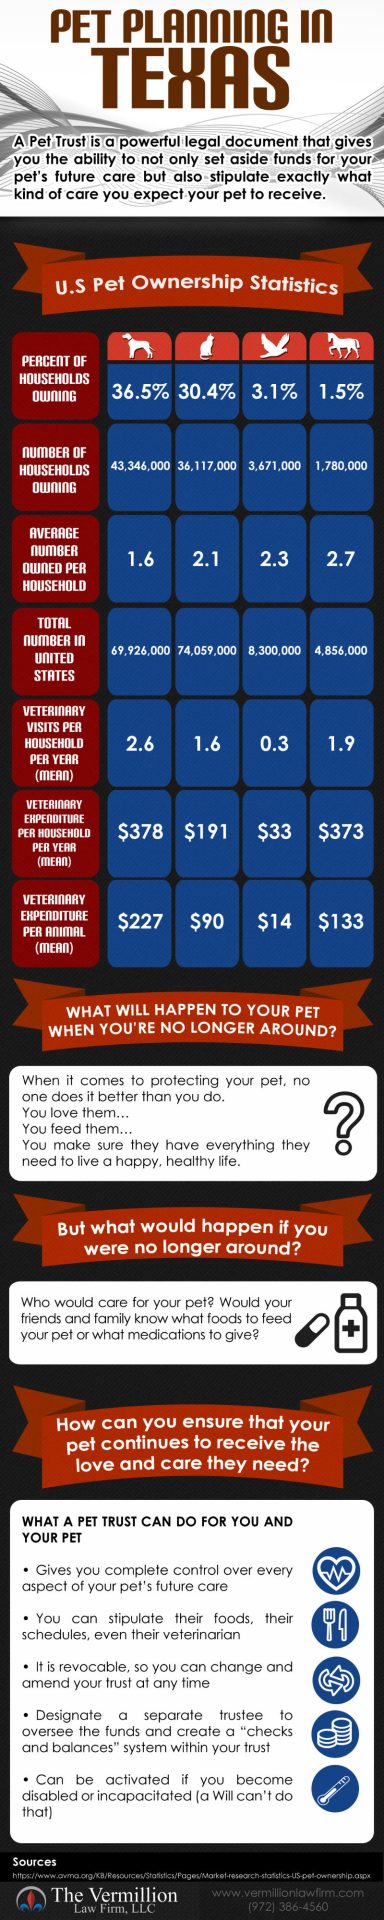 Pet Planning in Texas Infographic - Asset Protection & Business Planning Lawyer - Dallas, Texas